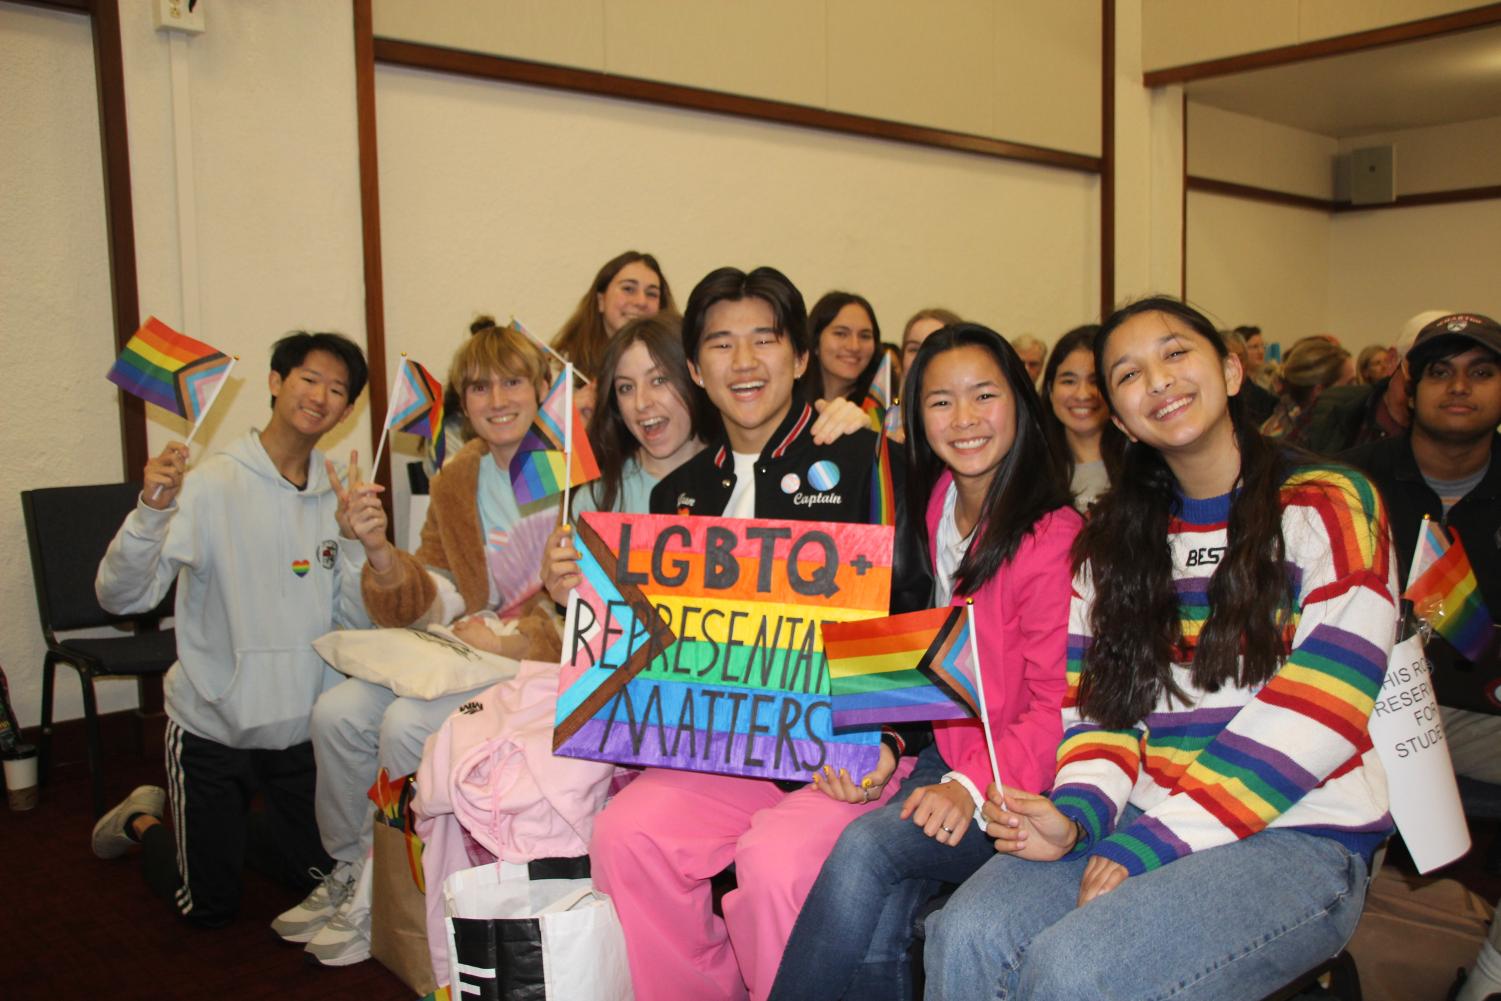 Members of GSA, PVHS/Pen alumni, teachers, parents, PVE Mayor Jim Roos, and author Kyle Lukoff’s parents, all spoke in support of LGBTQ+ visibility in schools. (Photo by Eva Mayrose)